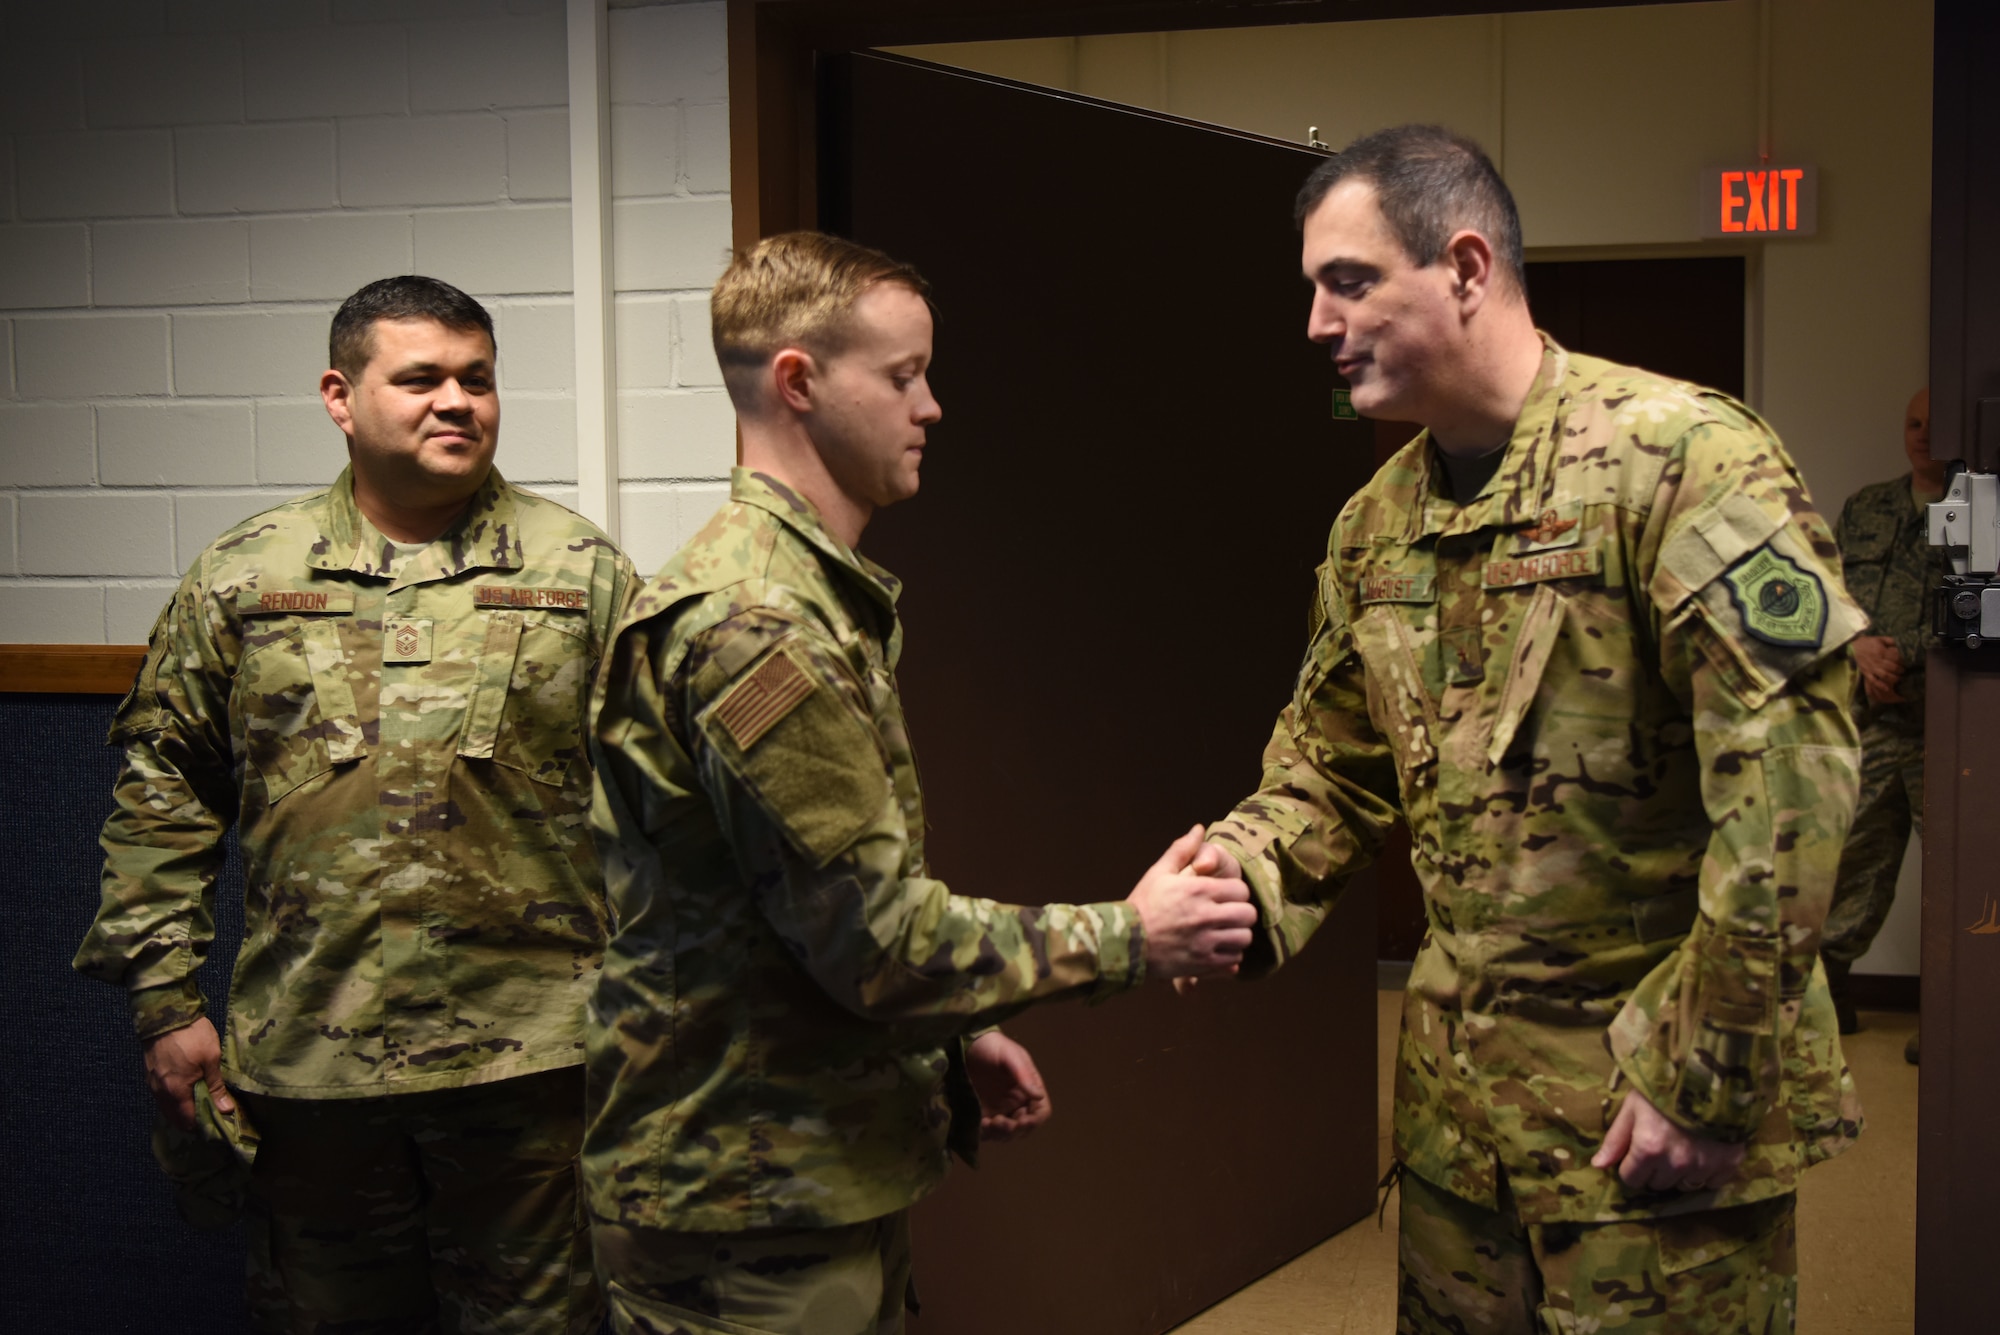 Tech Sgt. Gabriel Vest, 86th Airlift Wing Maintenance Group, training management noncommissioned officer in charge shakes hands with Brig. Gen. Mark August, 86th AW commander accompanied by Chief Master Sgt. Ernesto Rendon, 86th AW command chief. Vest was named Airlifter of the Week, a program which recognizes Ramstein Airmen who are devoted to making the 86th AW the “World’s Best Wing.”